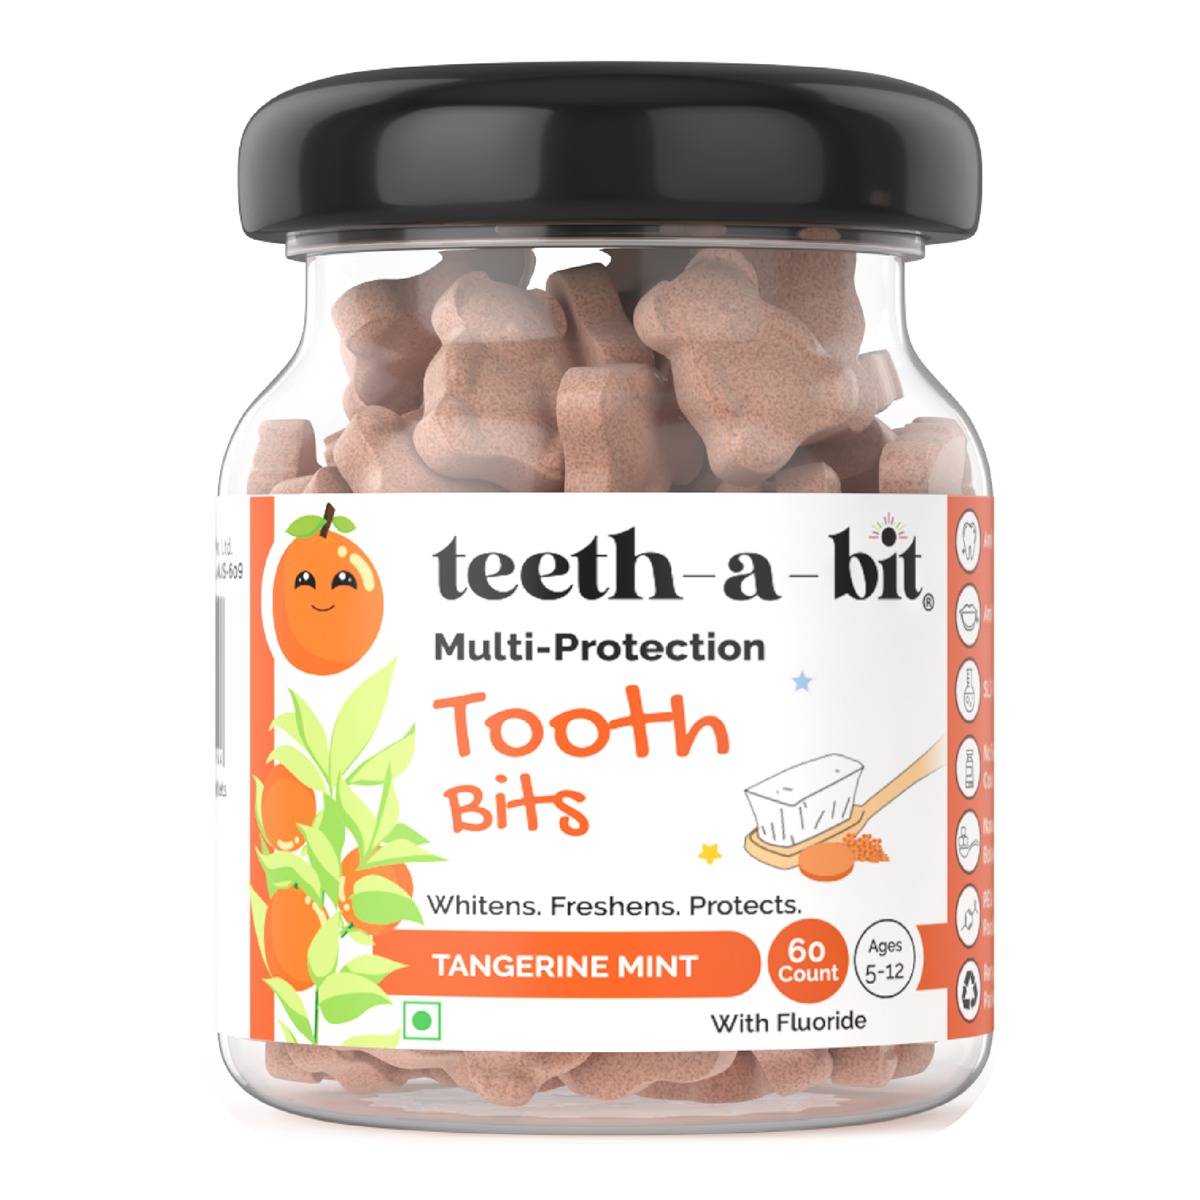 teeth-a-bit Kids Multi-Protection Tangerine Mint Tooth Bits, 60 Count